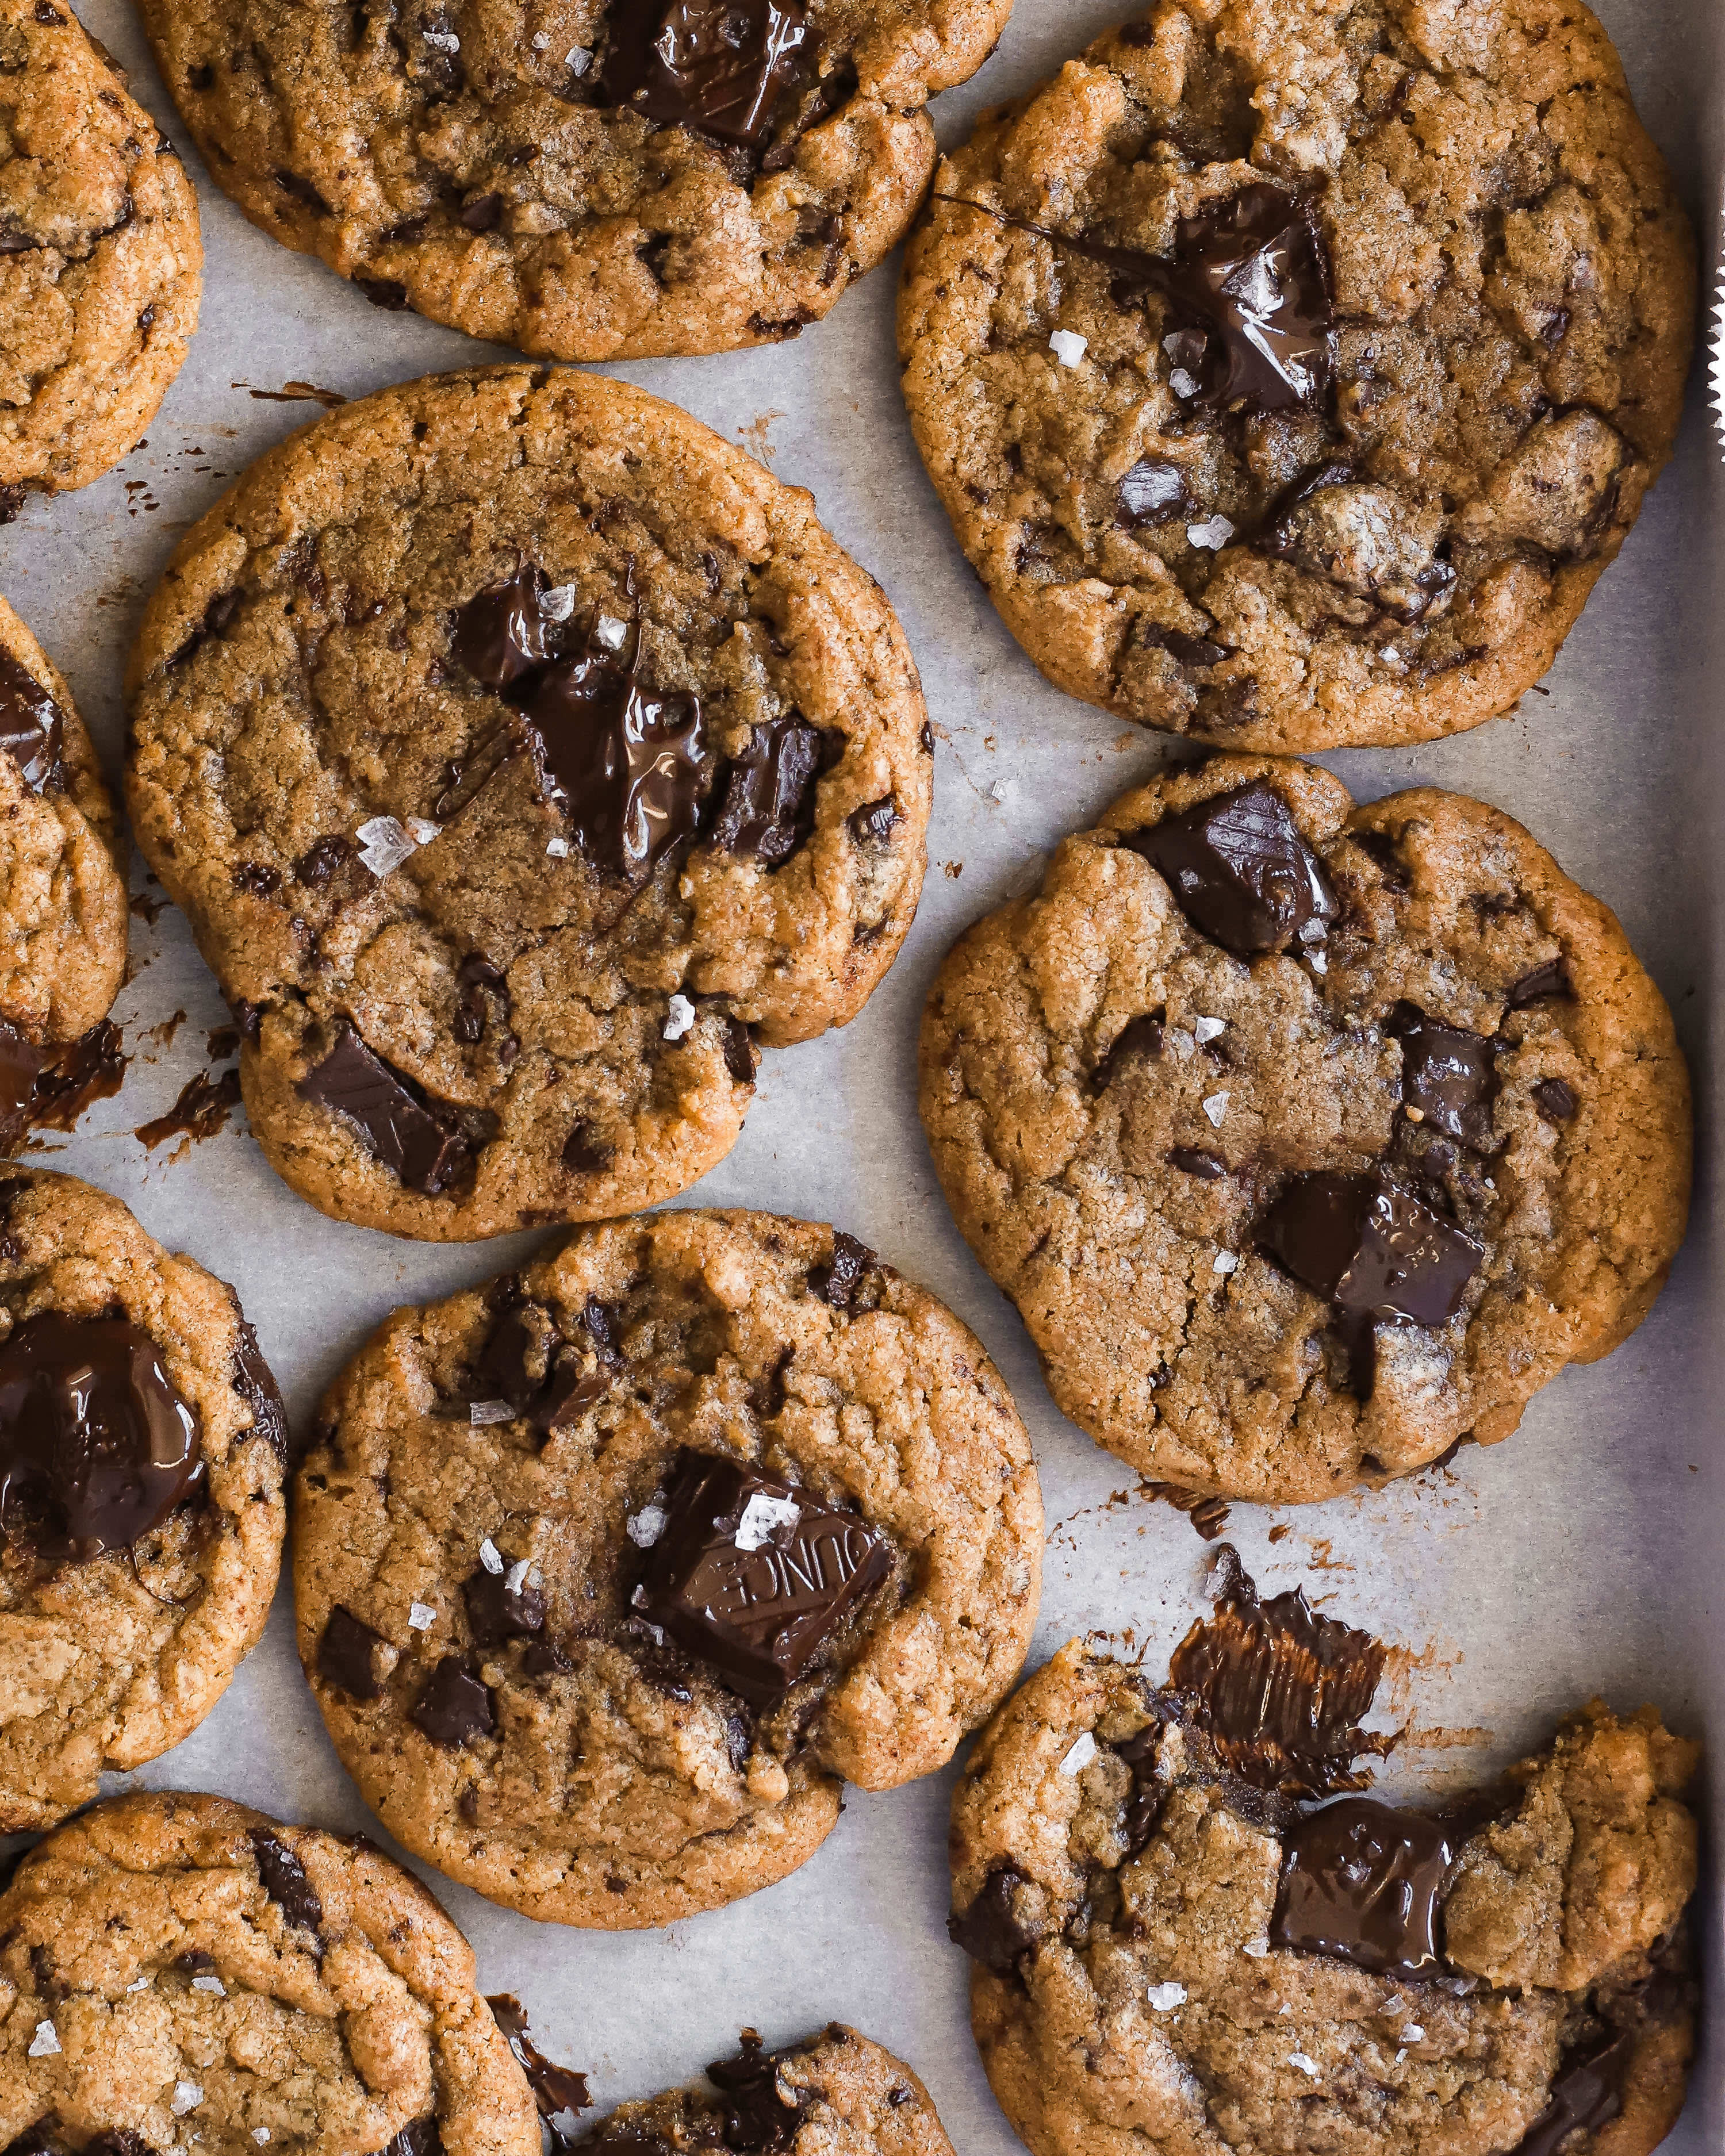 https://cdn.apartmenttherapy.info/image/upload/v1658758998/k/Edit/2022-08-Brown-Butter-Chocolate-Chip-Cookies/Brown_Butter_Chocolate_Chip_Cookies-6.jpg